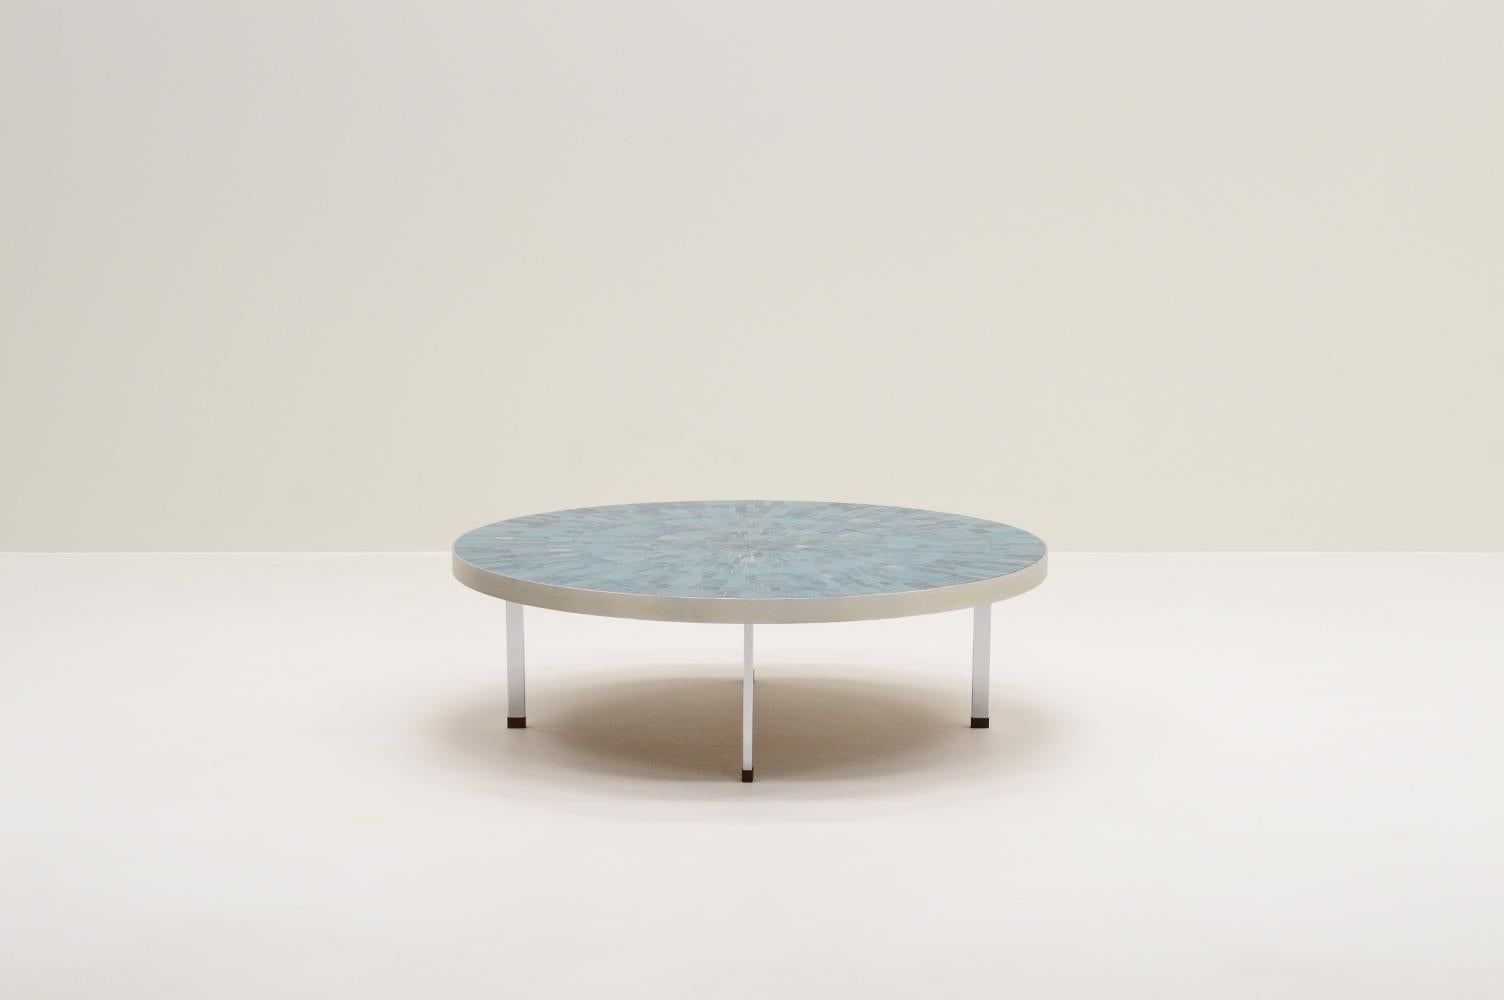 Mosaic coffee table by Berthold Müller-Oerlinghausen (1893 – 1979) for Mosaikwerkstatt Berthold Müller-Oerlinghausen, 1960s Germany. Round bruched aluminum edge with an inlay of various tones of blue and some green and pink mosaic tiles. Chrome legs